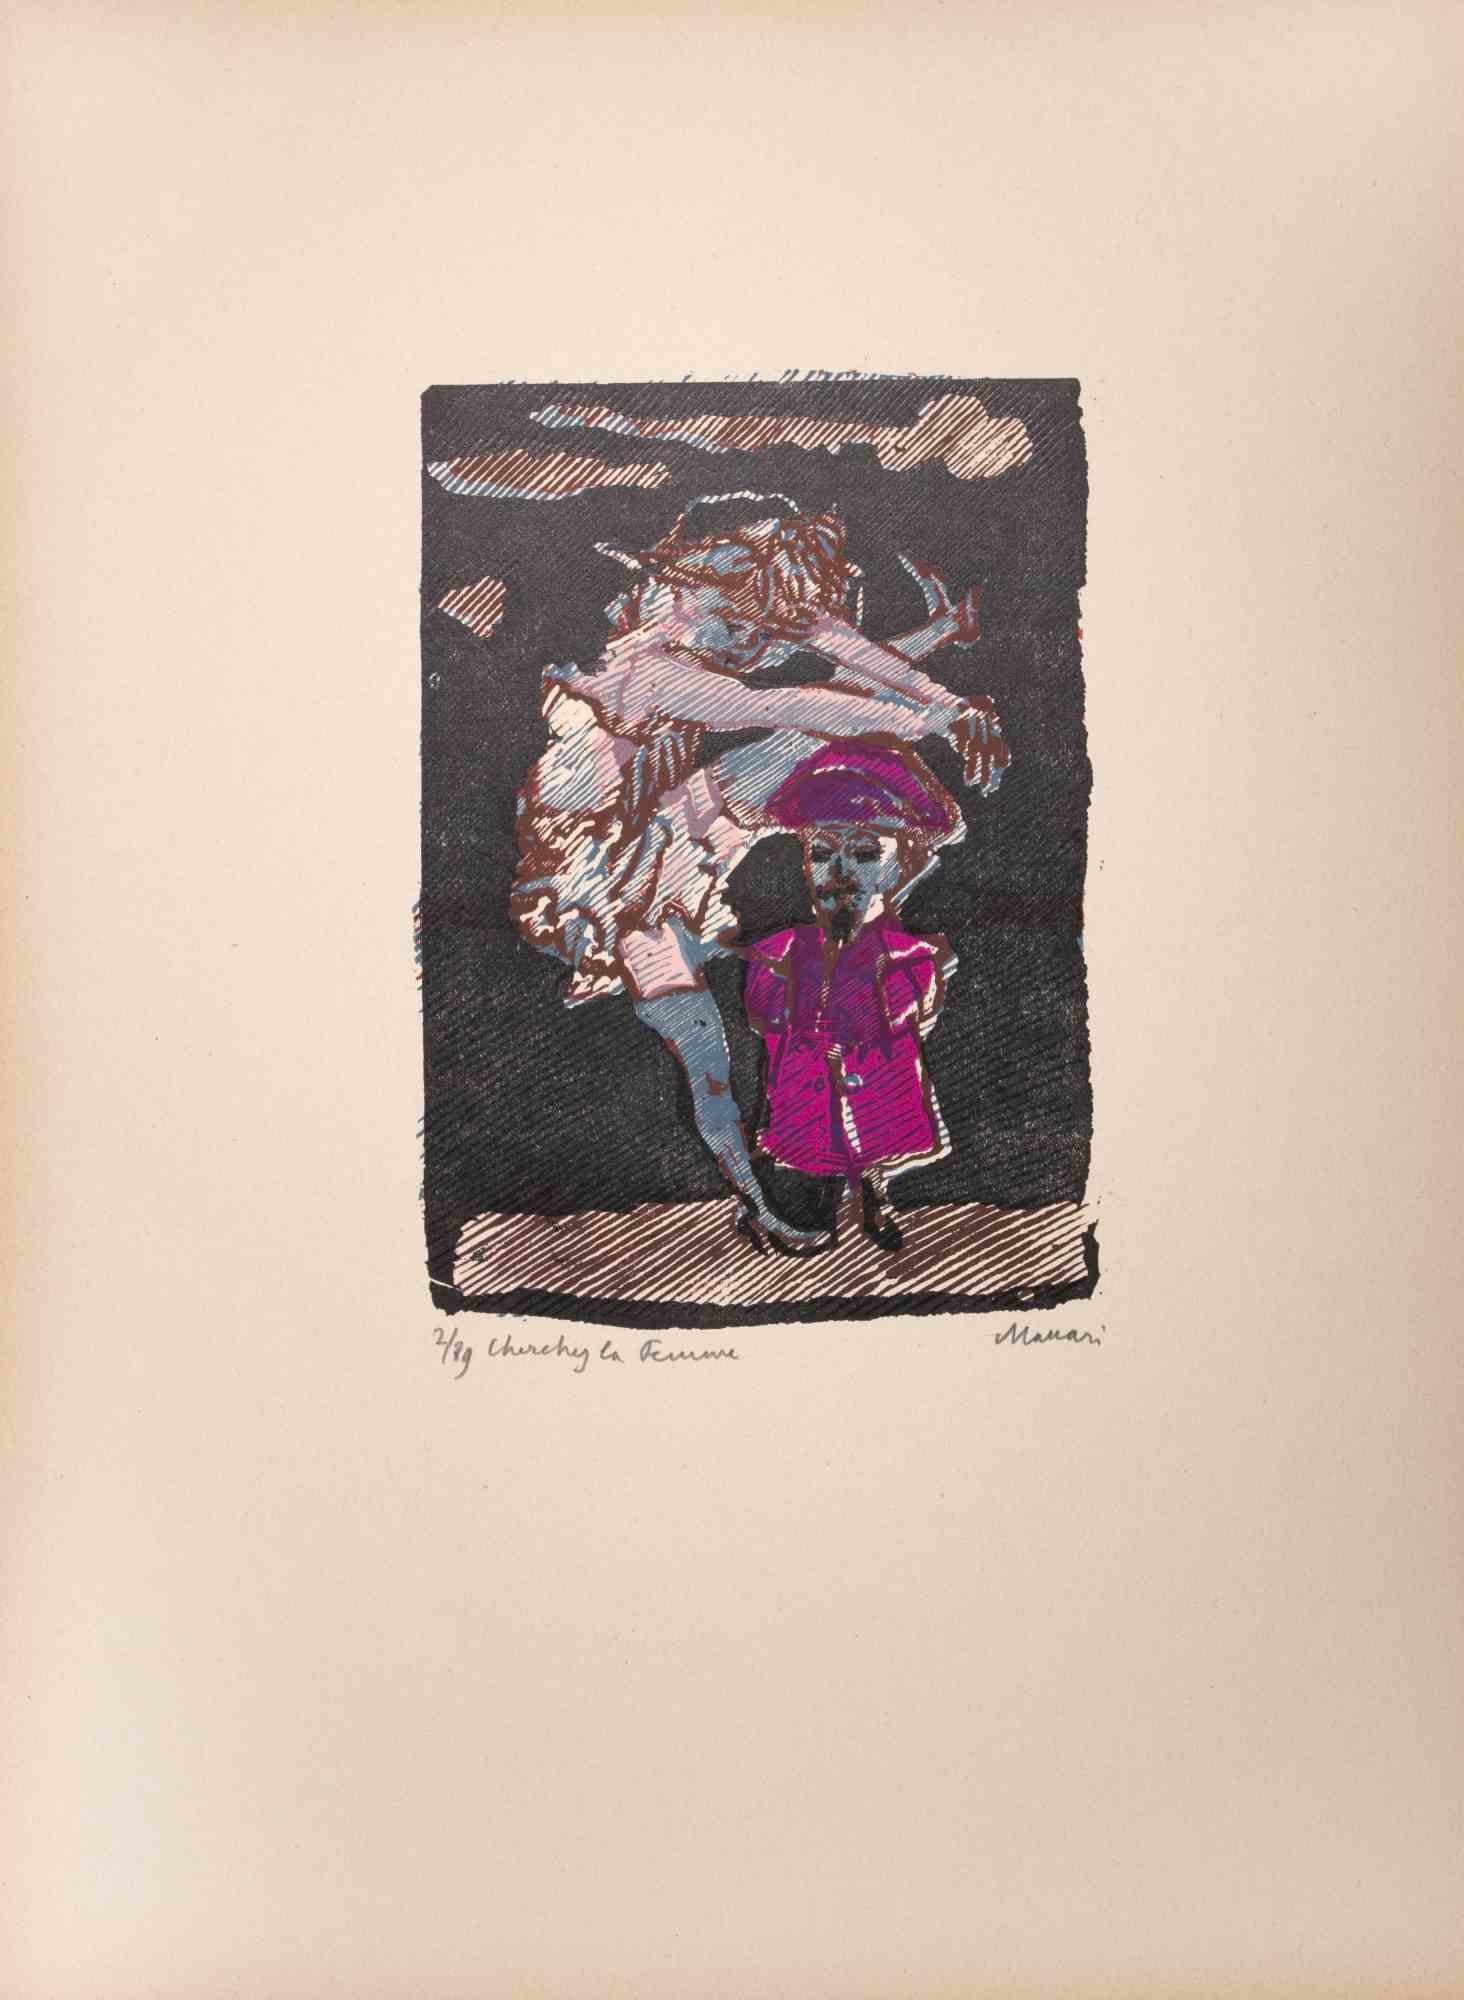  Cherchez la Femme is  an Artwork realized by Mino Maccari  (1924-1989) in Mid 20th Century.

Colored woodcut on paper. Hand-signed on the lower, numbered 2/89 specimens and titled on the left margin.

Good conditions.

Mino Maccari (Siena,